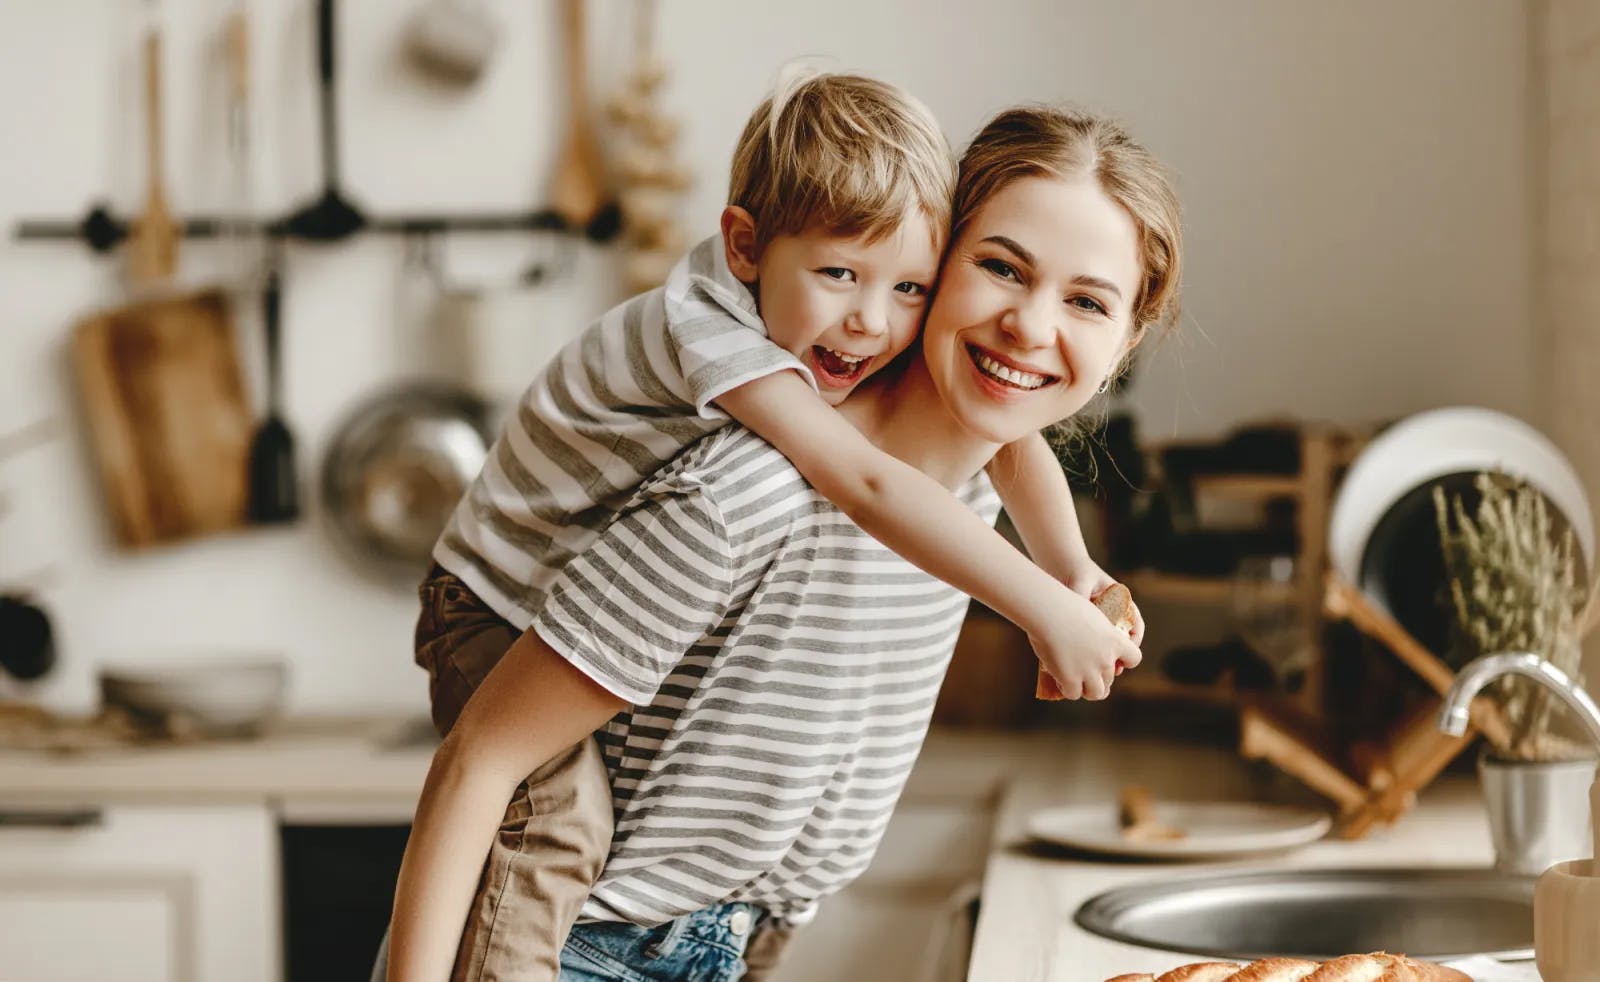 Mother giving son a piggy back ride in kitchen smiling